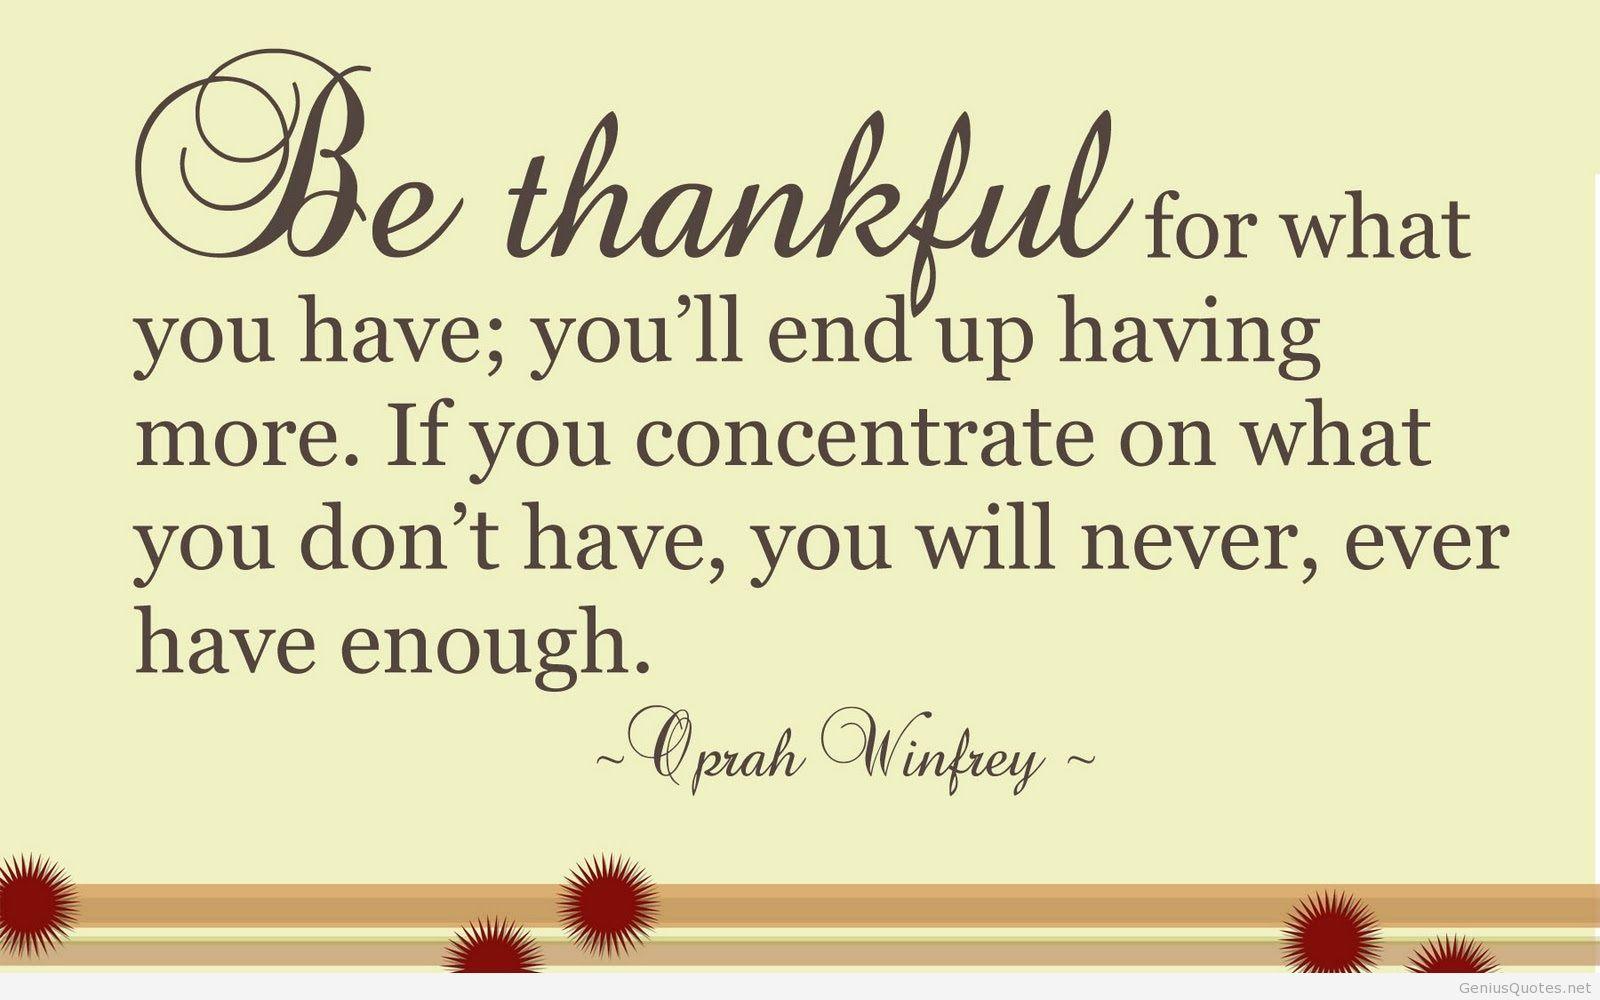 Thankful quotes, messages, image and wallpaper HD